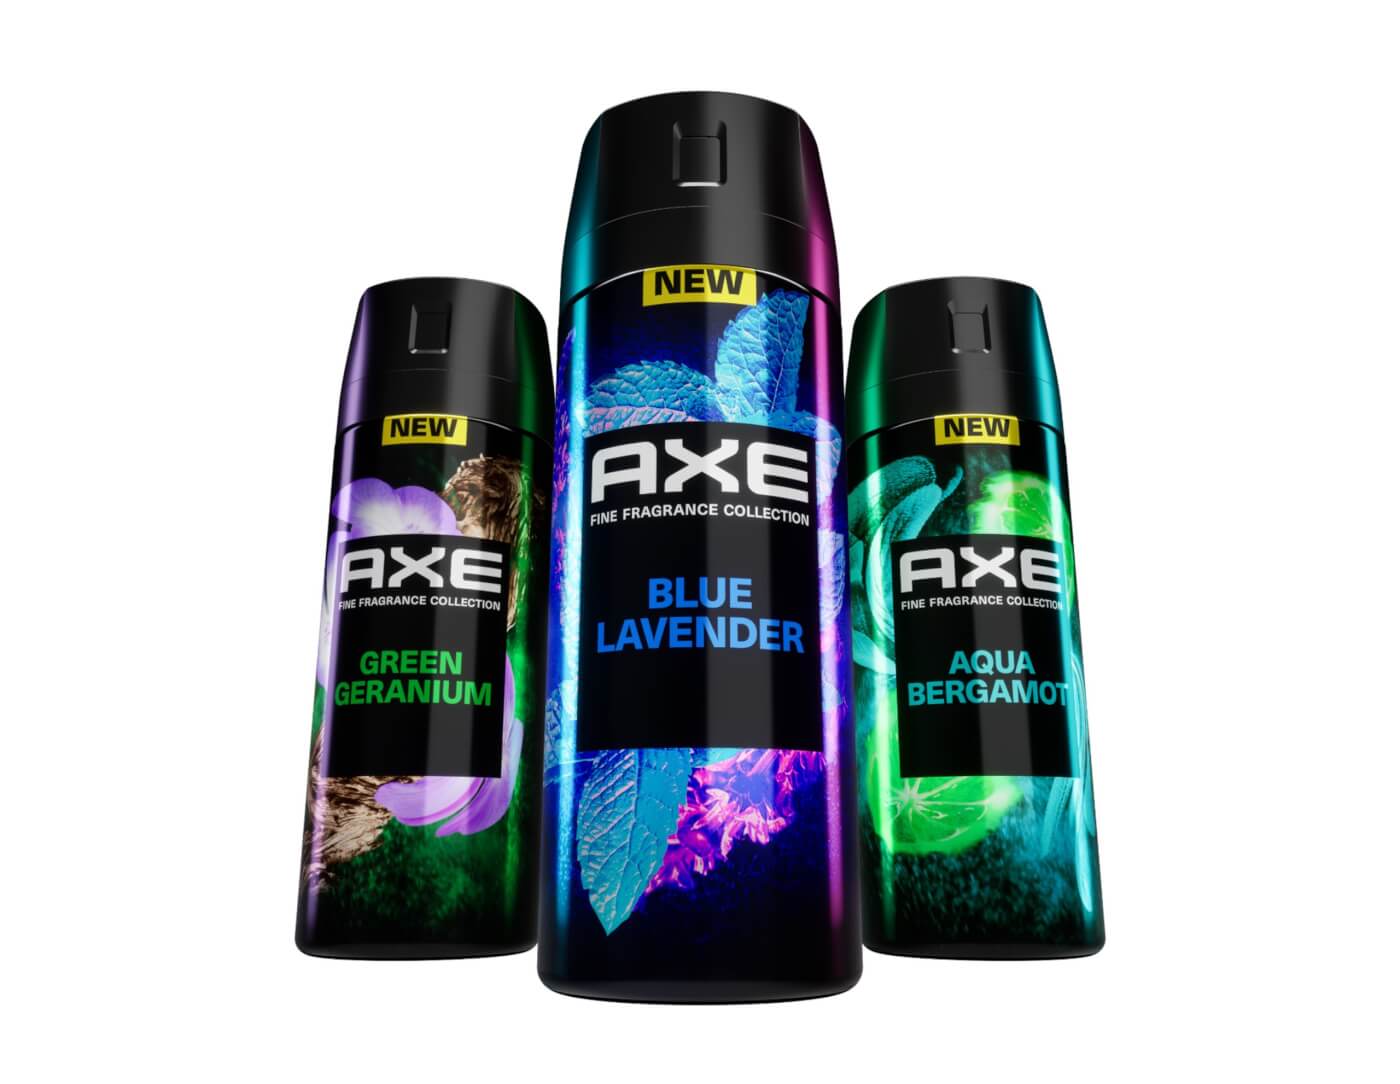 Line up of Axe fragrance products